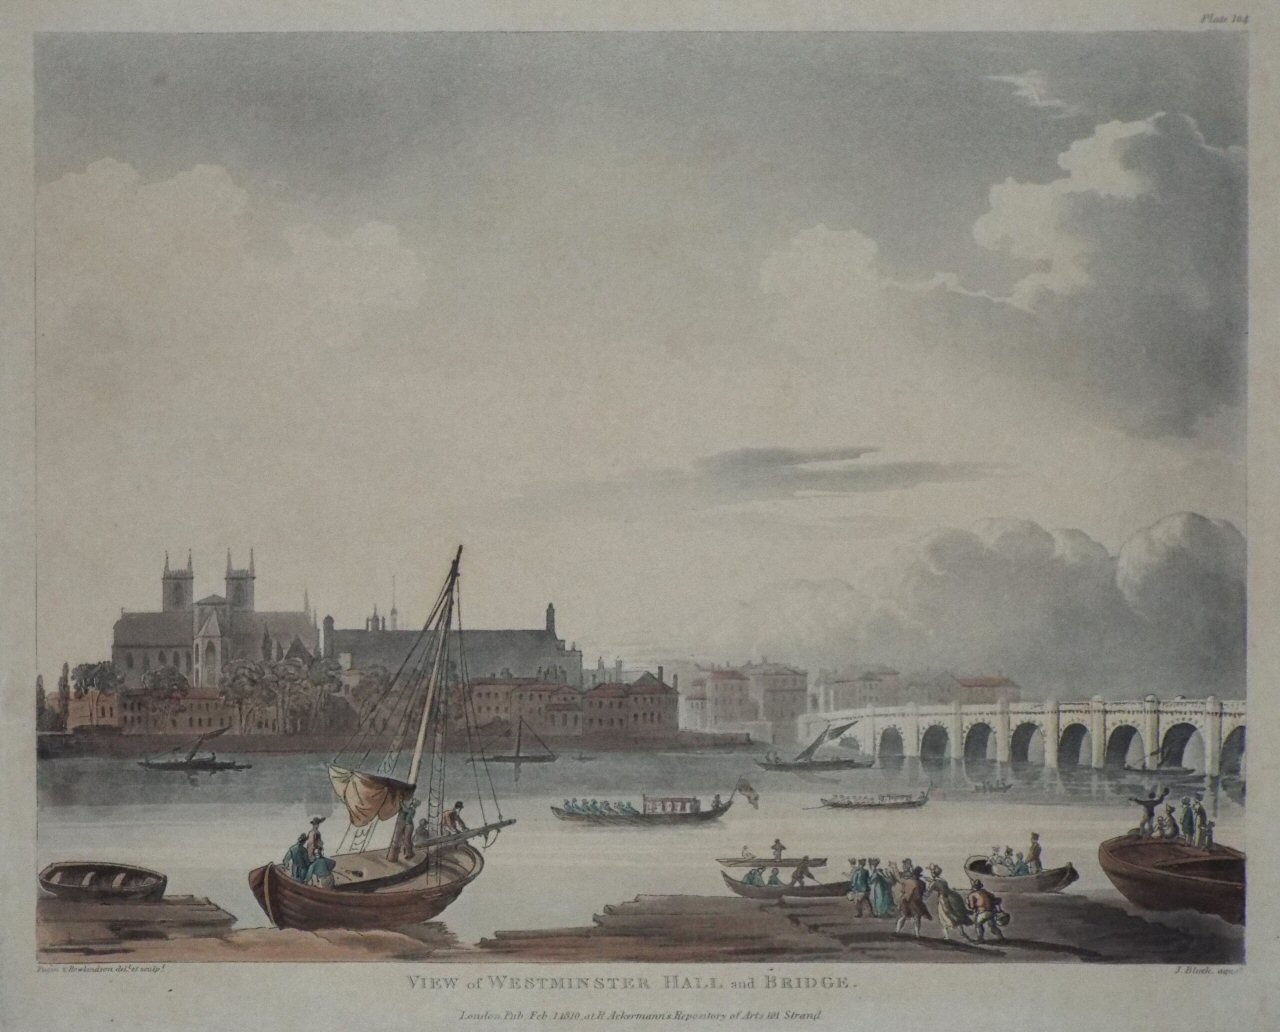 Aquatint - View of Westminster Hall and Bridge. - Bluck